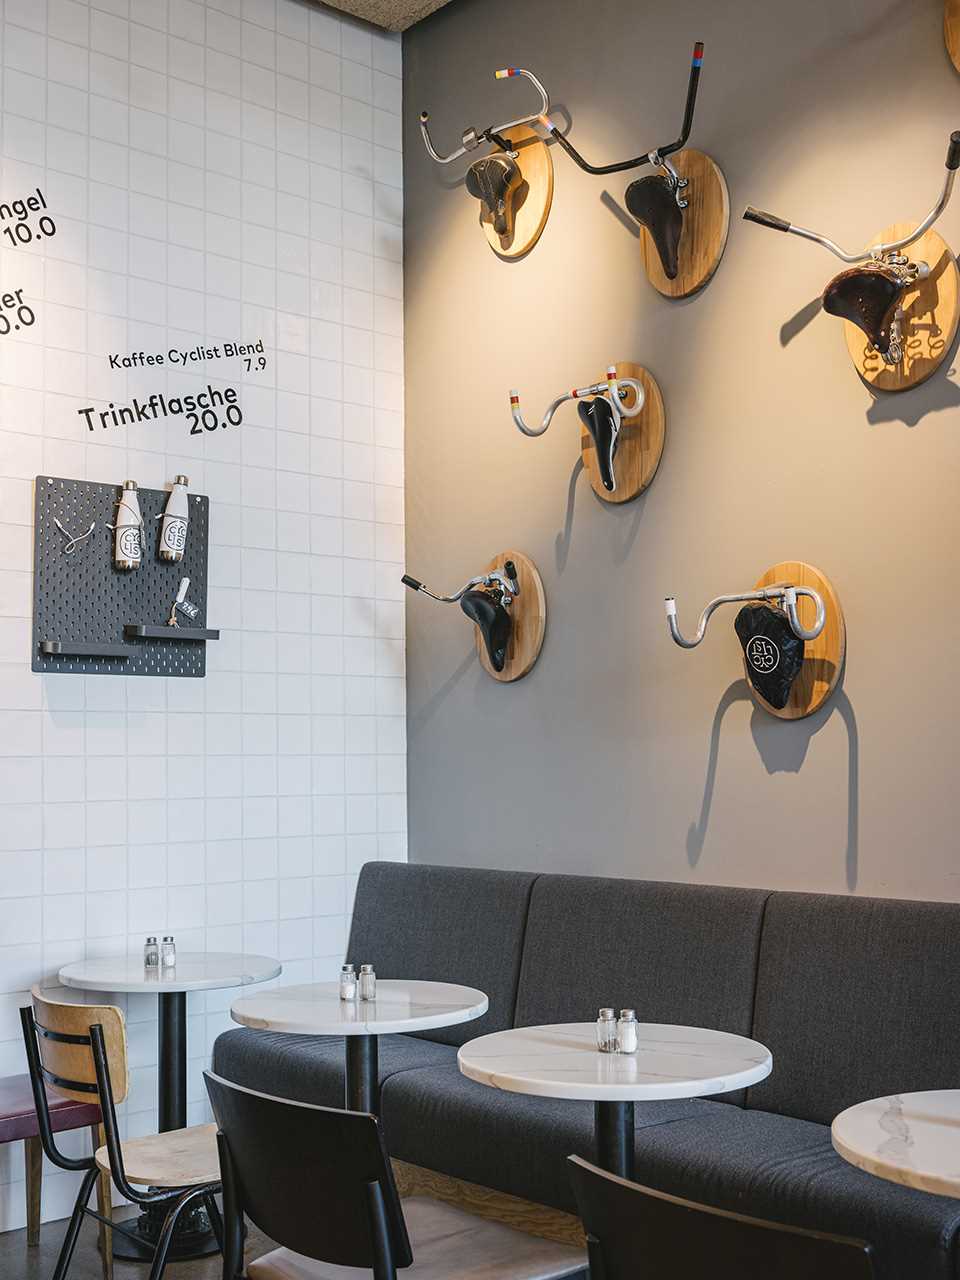 A modern cafe interior in Austria inspired by cycling.